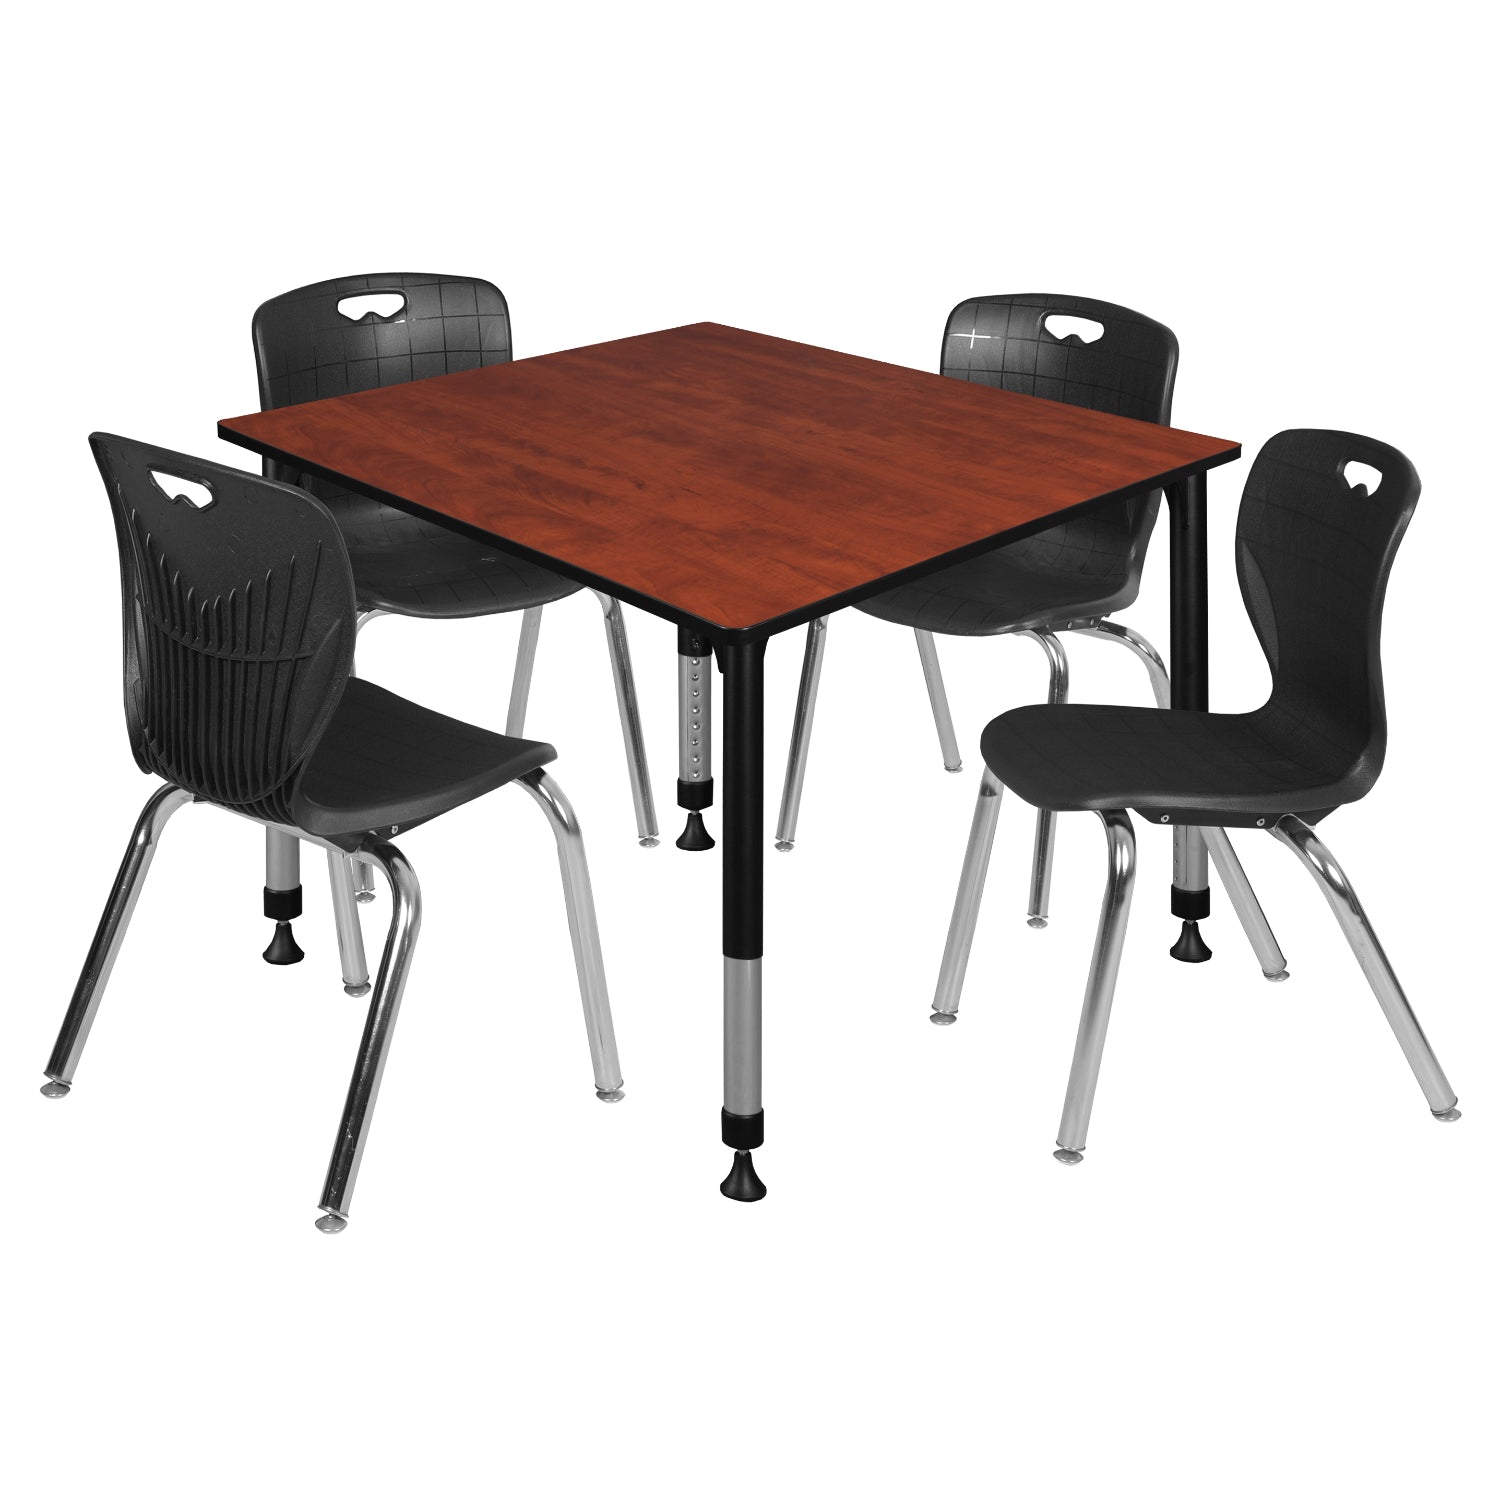 Kee Classroom Table and Chair Package, Kee 48" Square Adjustable Height Table with 4 Andy 18" Stack Chairs